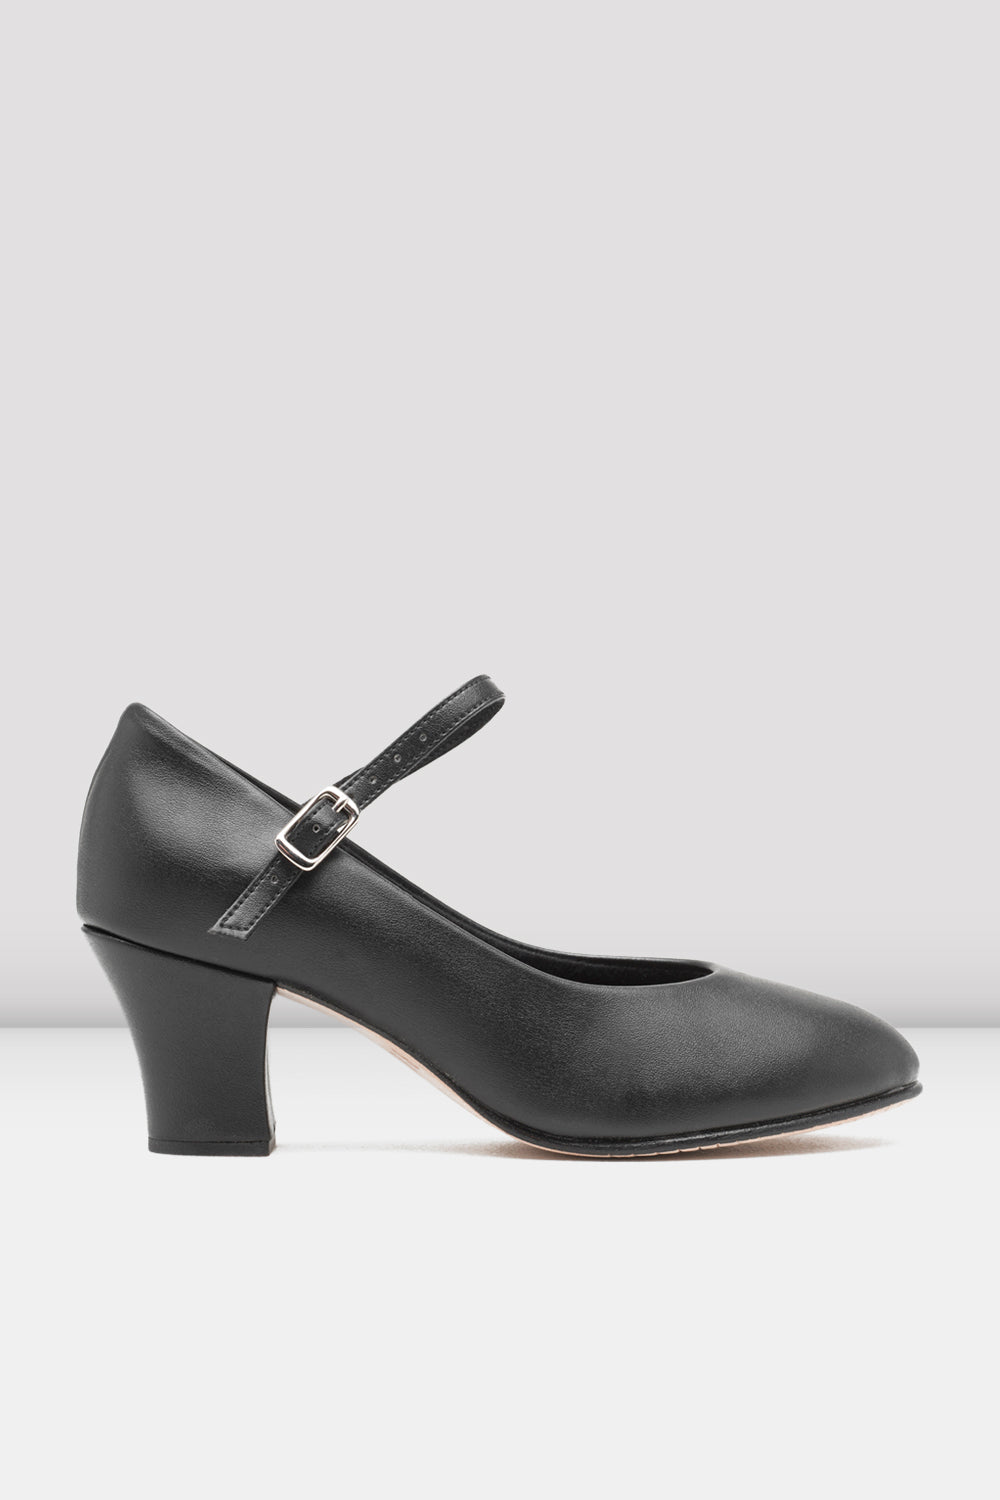 BLOCH Ladies Diva Character Shoes, Black Synthetic Leather